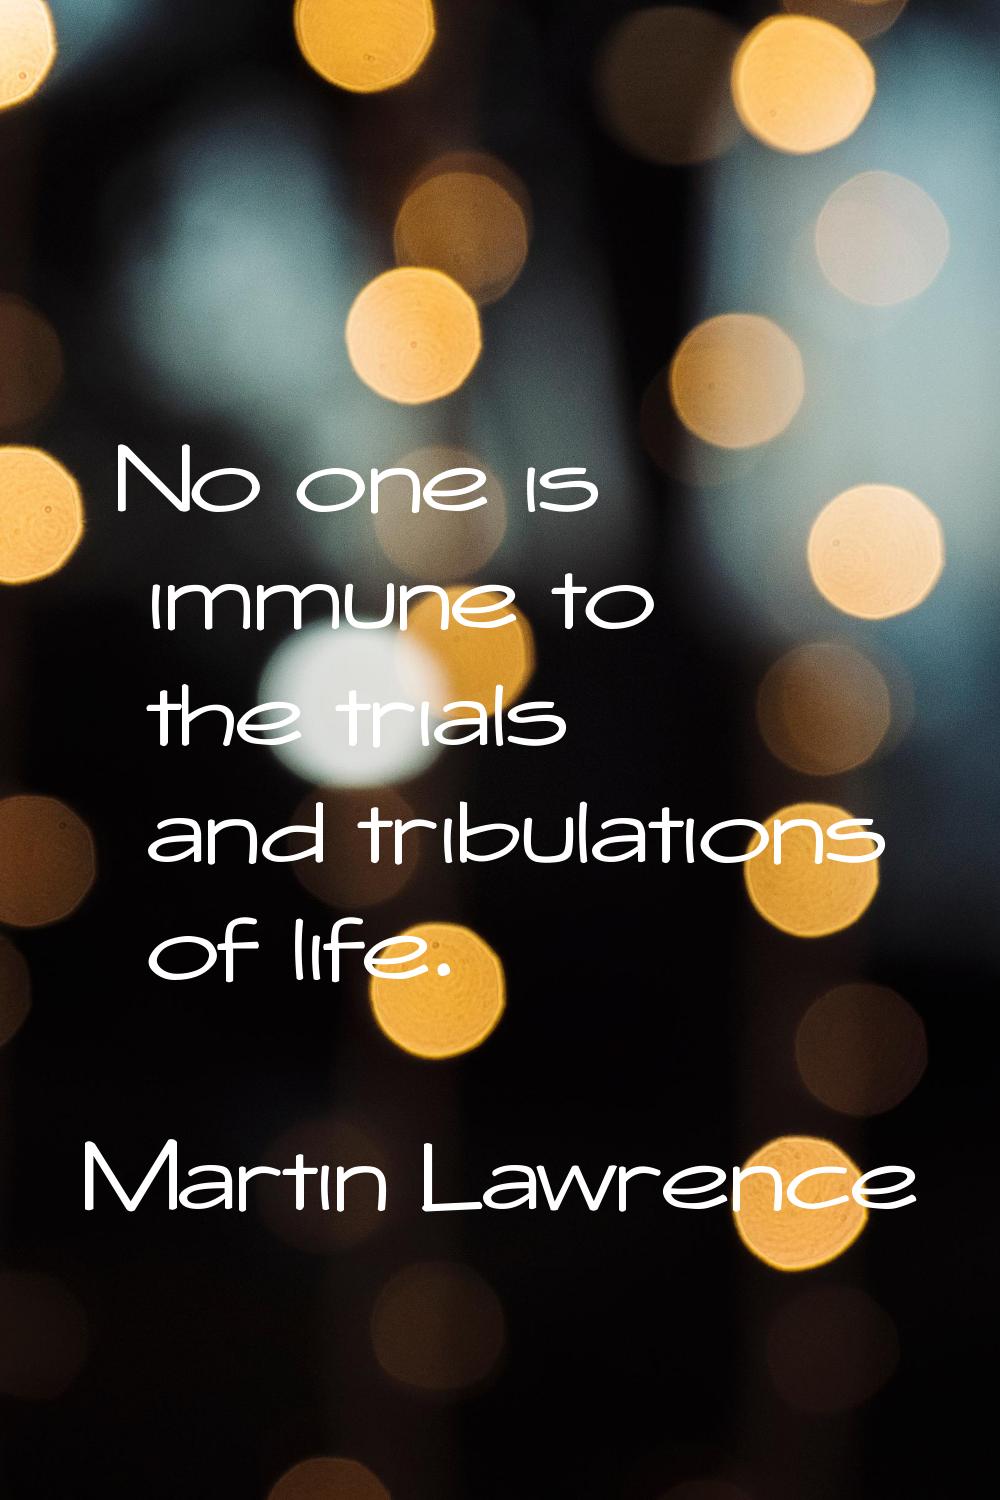 No one is immune to the trials and tribulations of life.